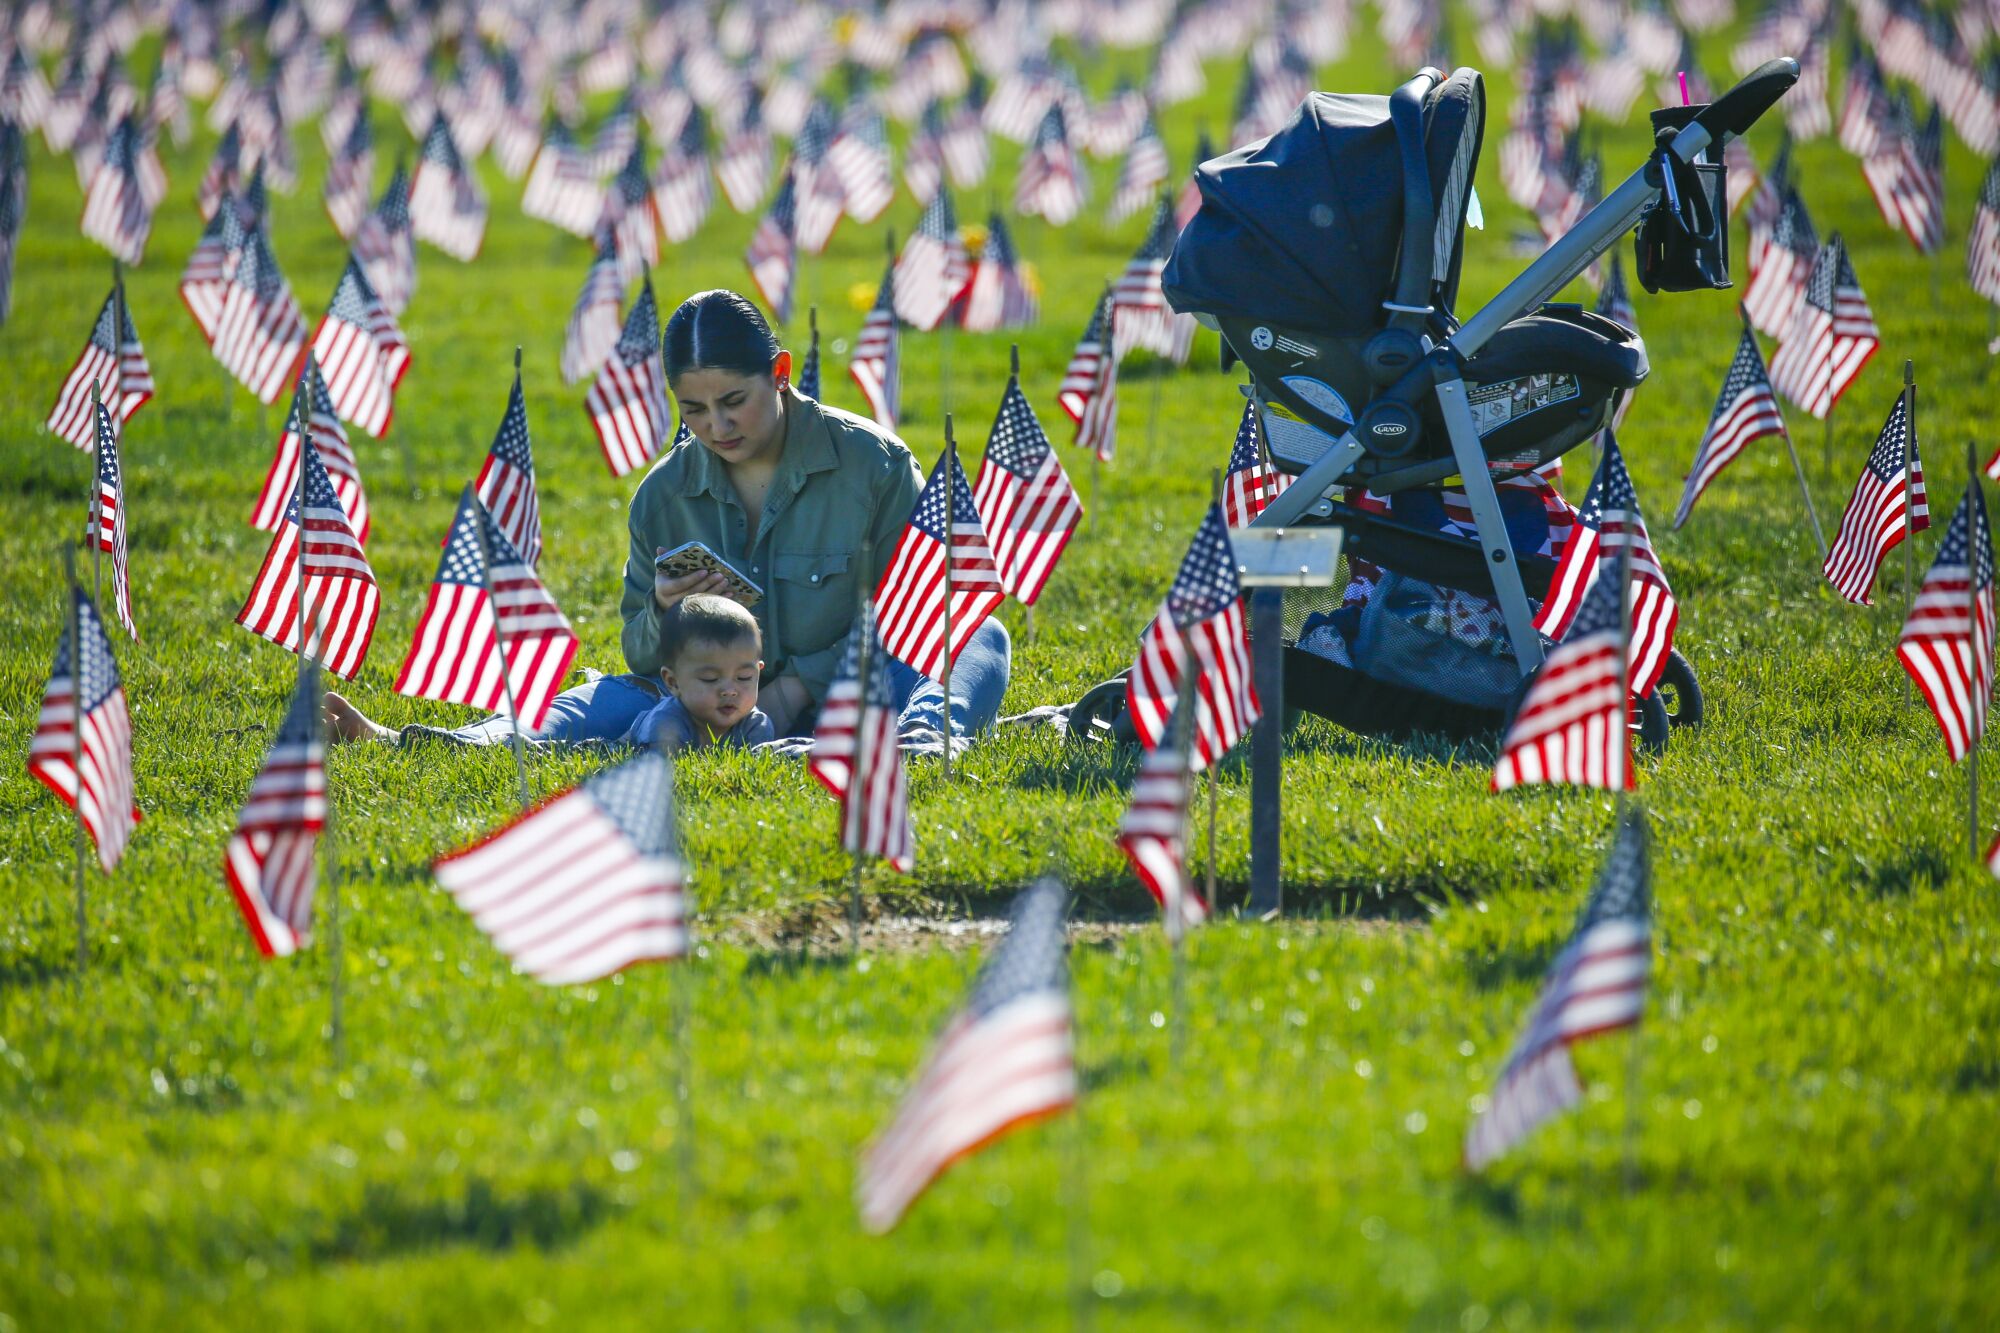 A woman and a baby sit amid flags planted in the grass